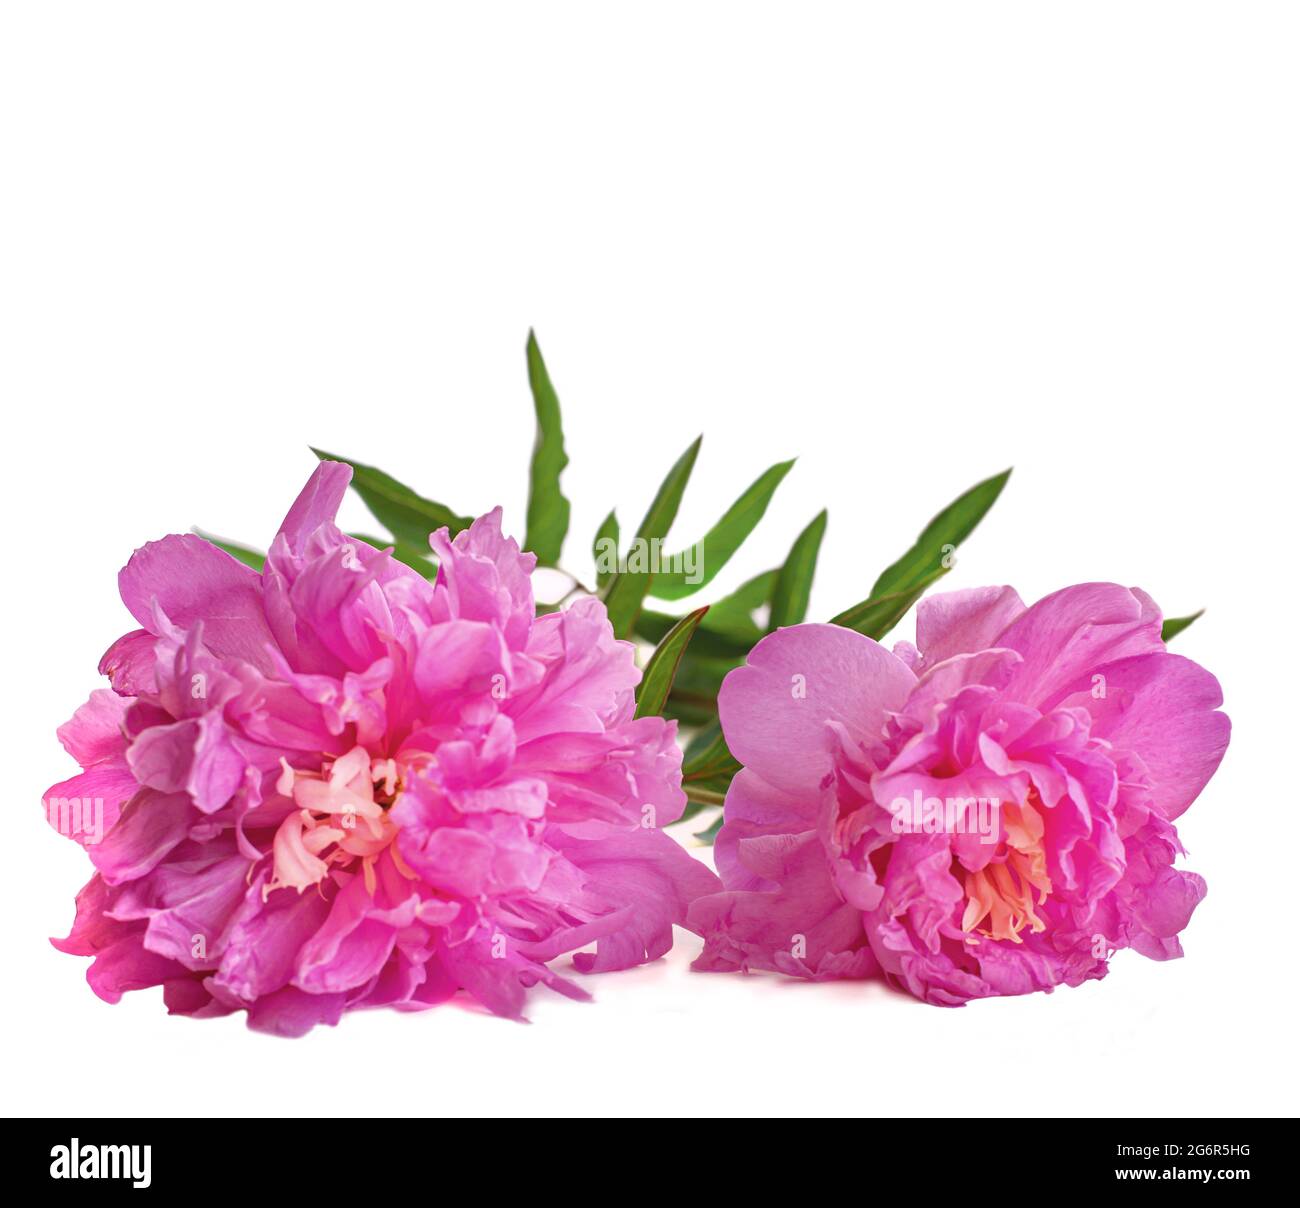 Pink Peonies isolated on white background. Two flowers lie on windowsill. Stock Photo